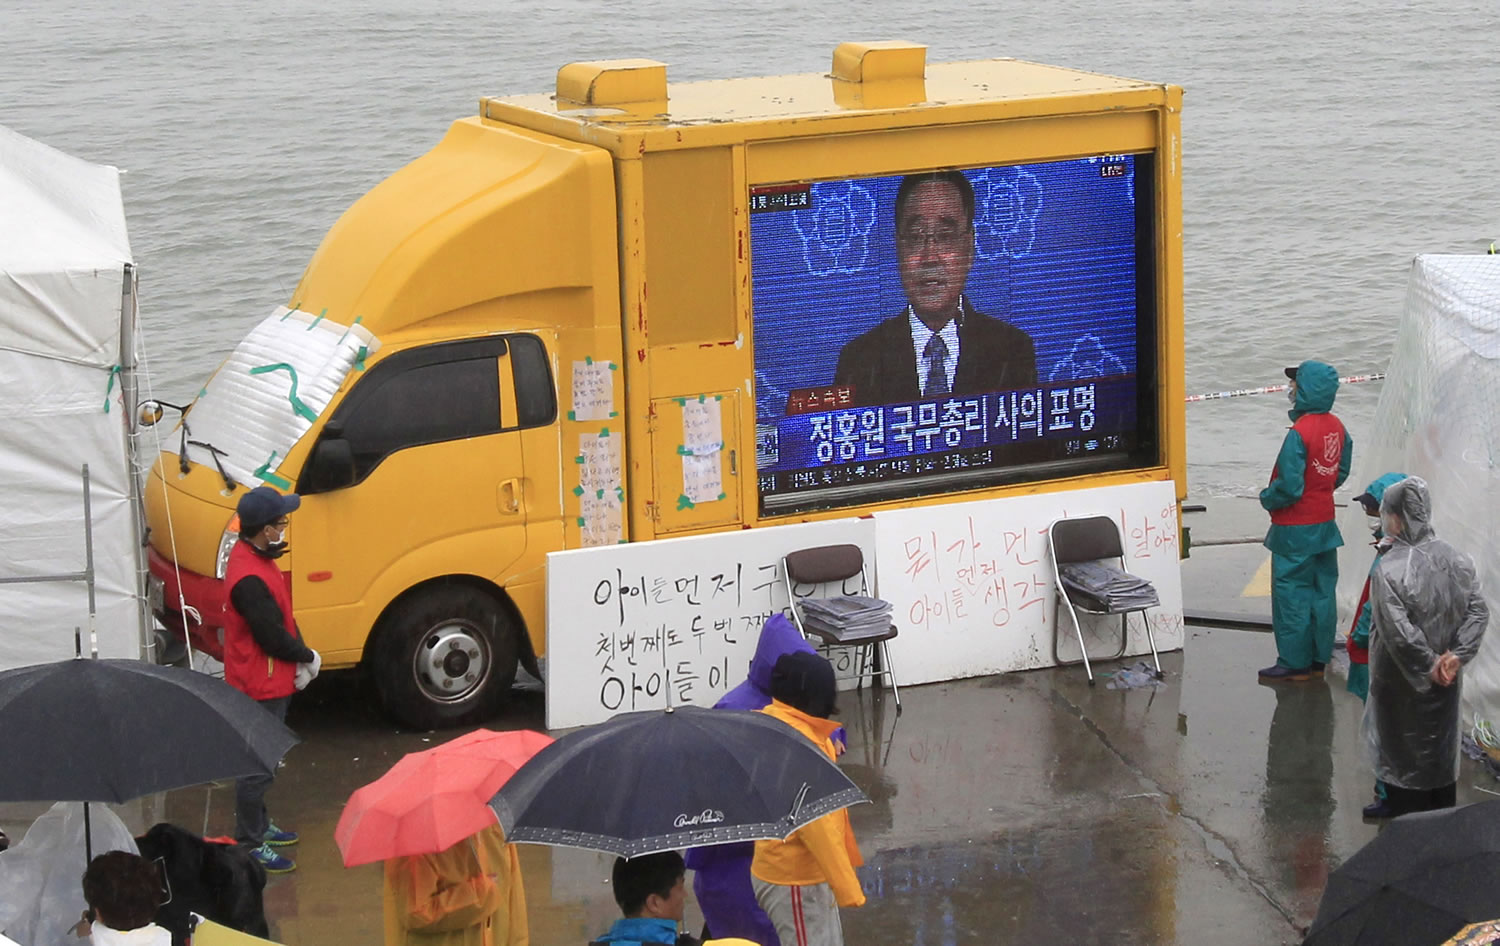 Relatives of passengers aboard the sunken ferry Sewol and onlookers watch a television news program Sunday showing South Korean Prime Minister Chung Hong-won offering his resignation at a port in Jindo, South Korea.